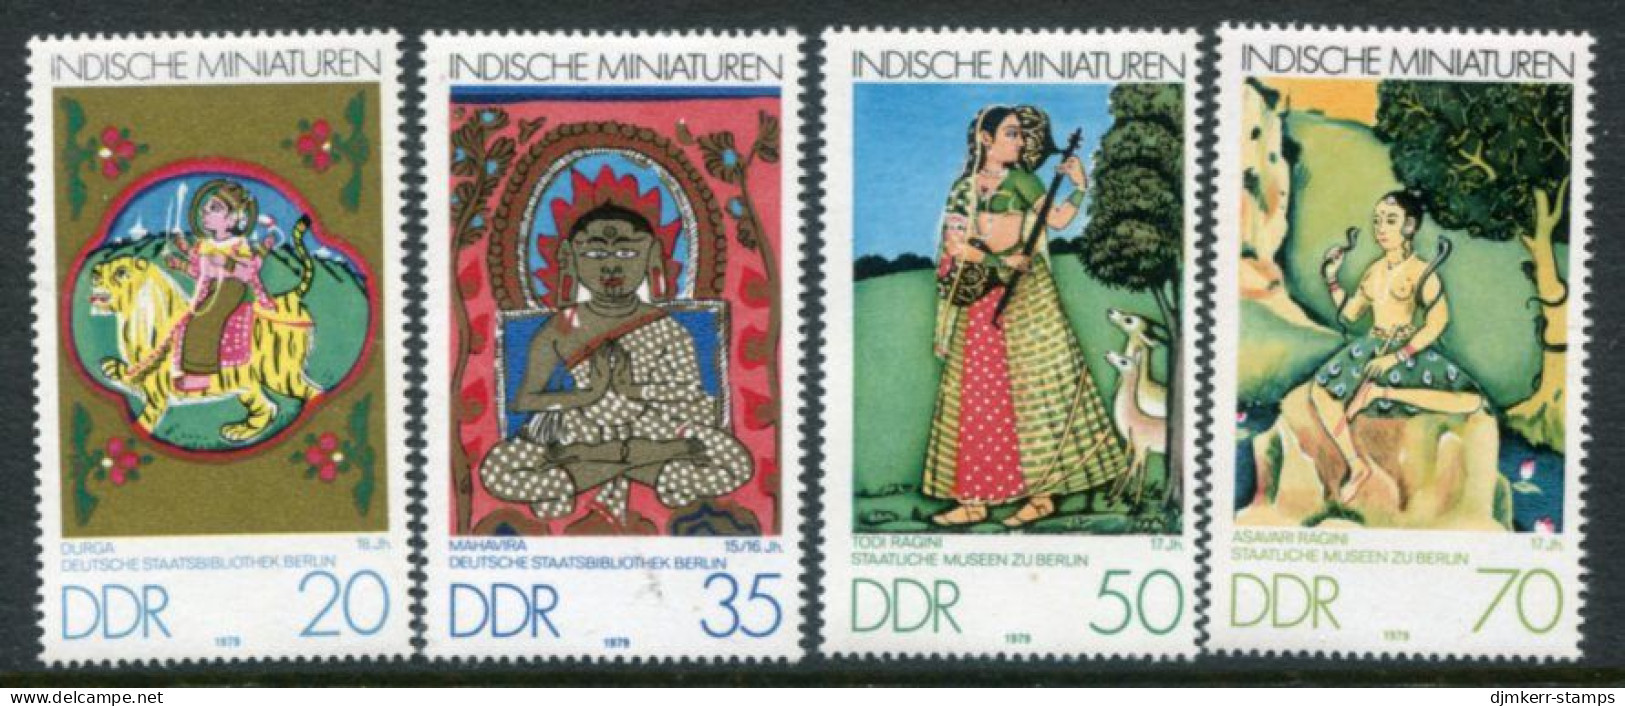 DDR / E. GERMANY 1979 Indian Miniatures MNH / **.  Michel  2418-21 - Ungebraucht